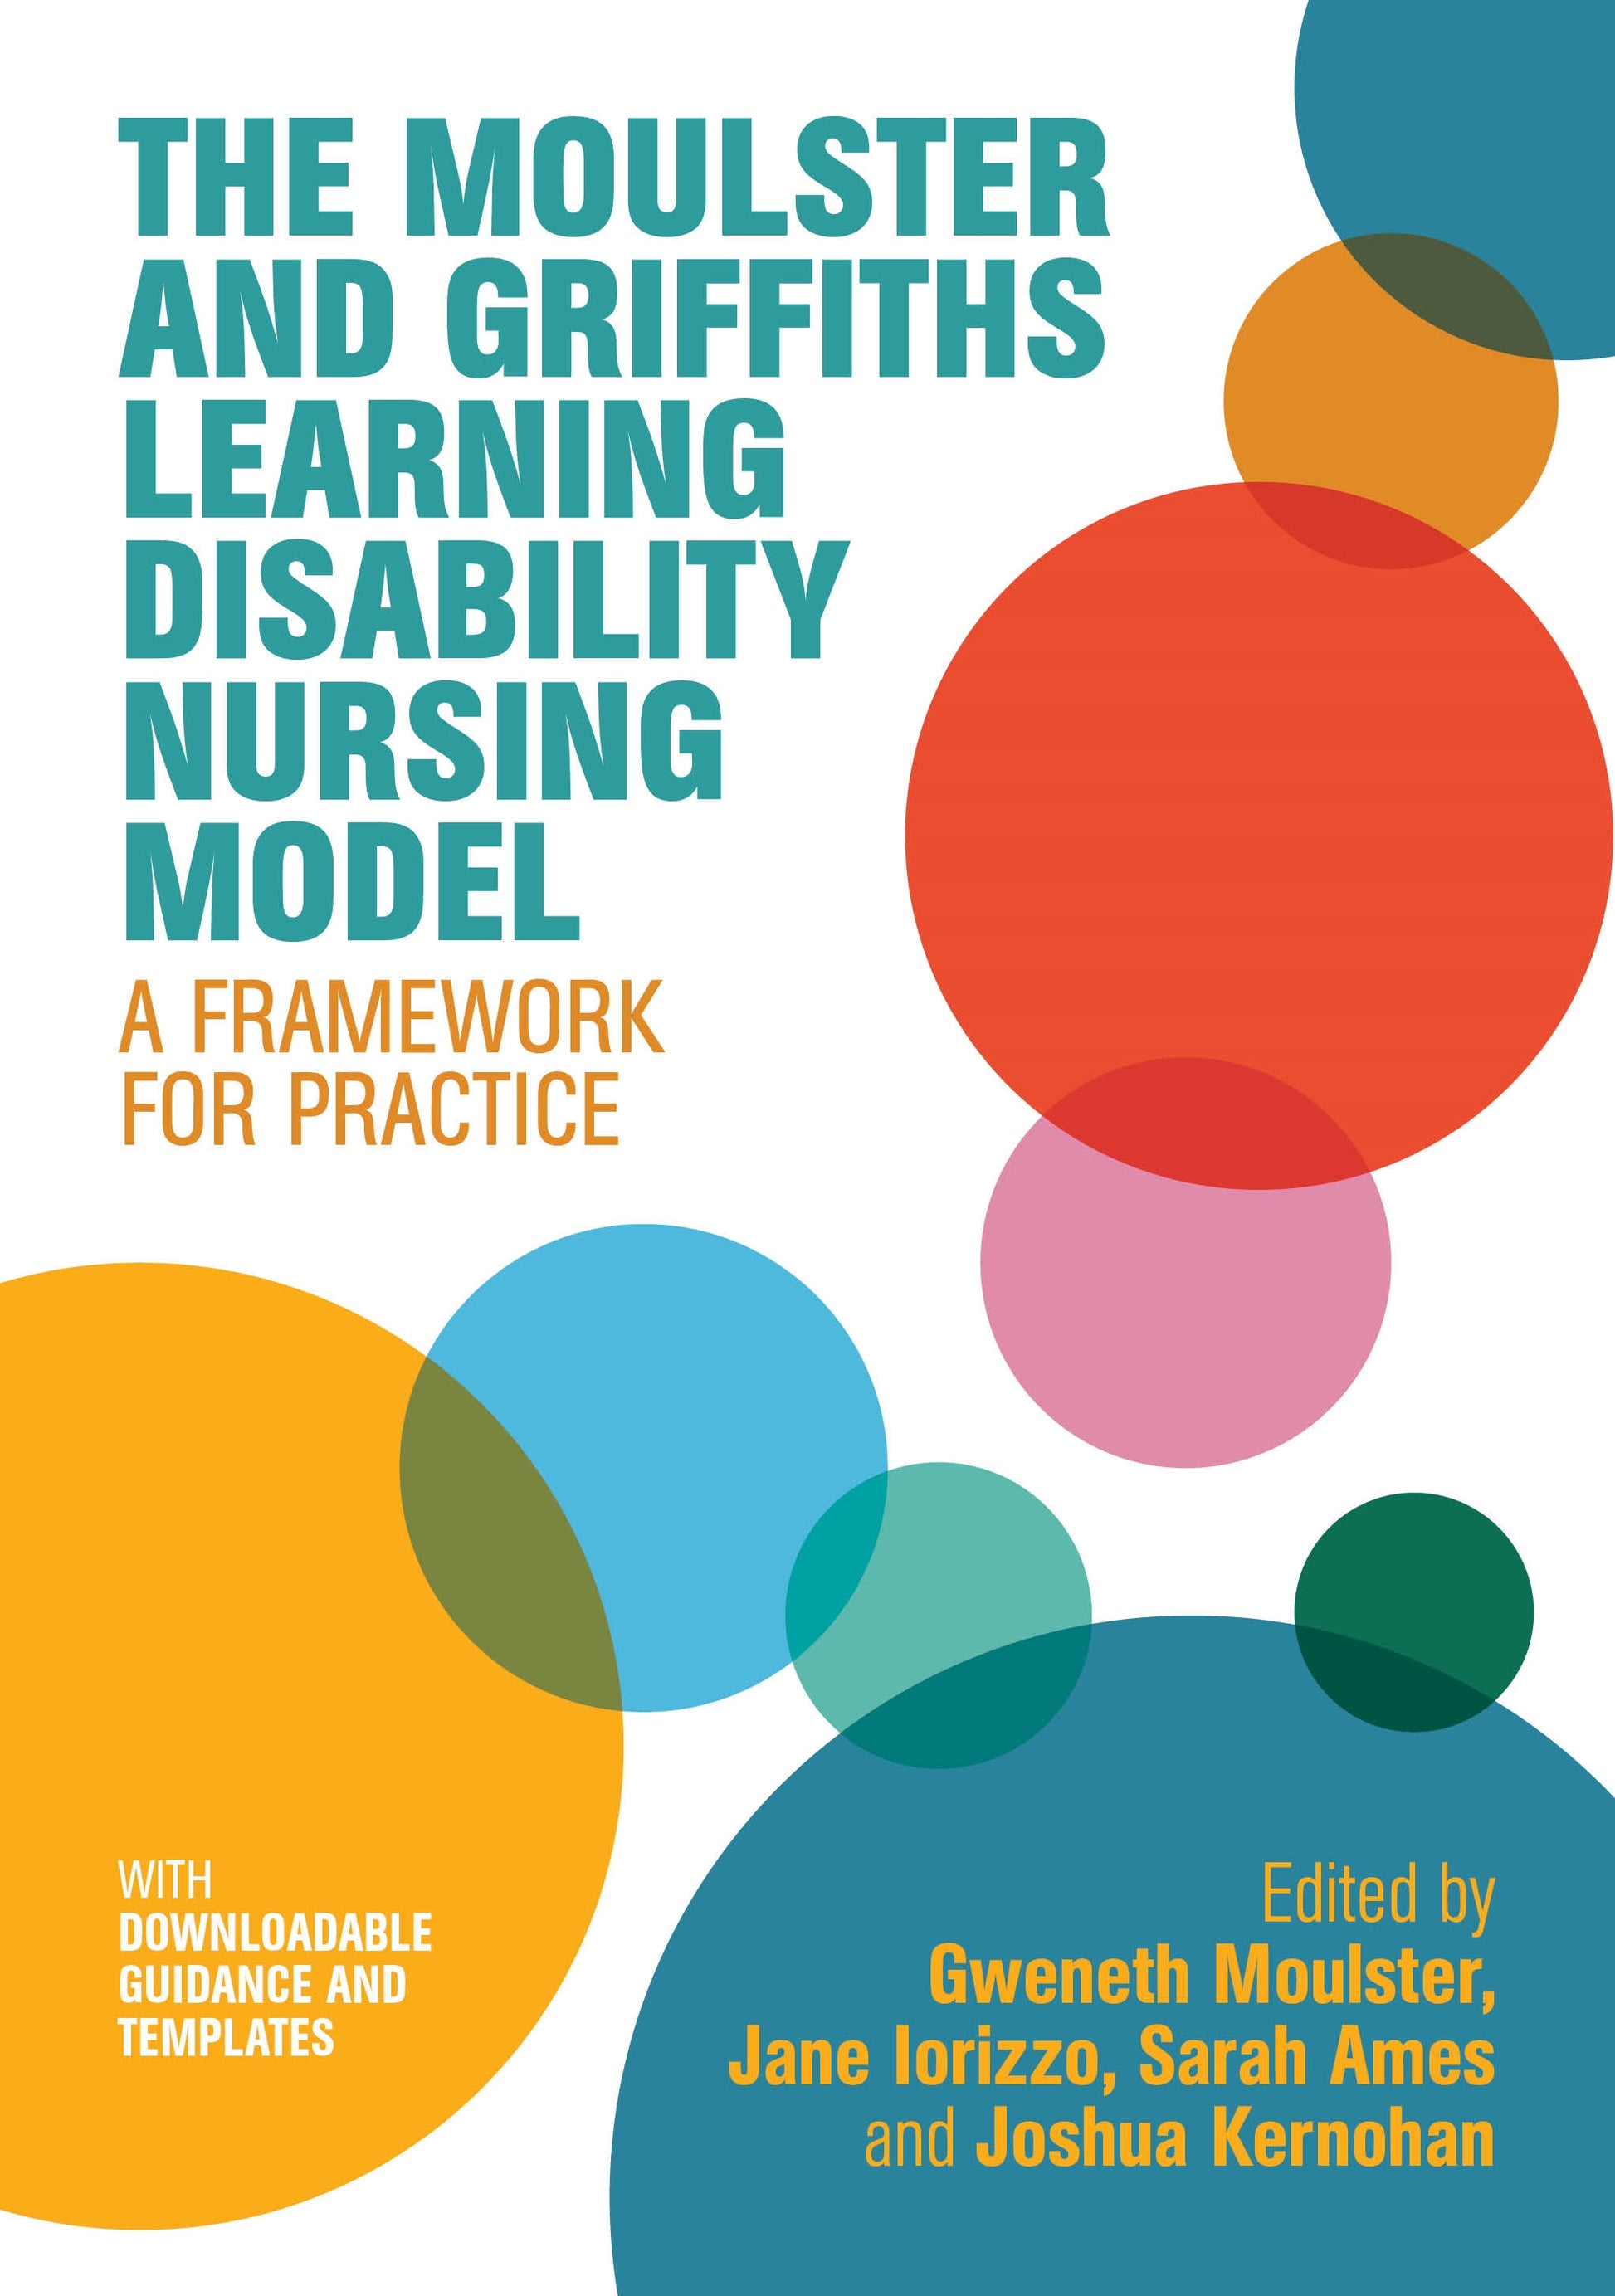 The Moulster and Griffiths Learning Disability Nursing Model by Helen Laverty, Gweneth Moulster, Jane Iorizzo, Sarah Ames, Joshua Kernohan, Hayley Goleniowska, Tom Griffiths, Emily Smith, No Author Listed